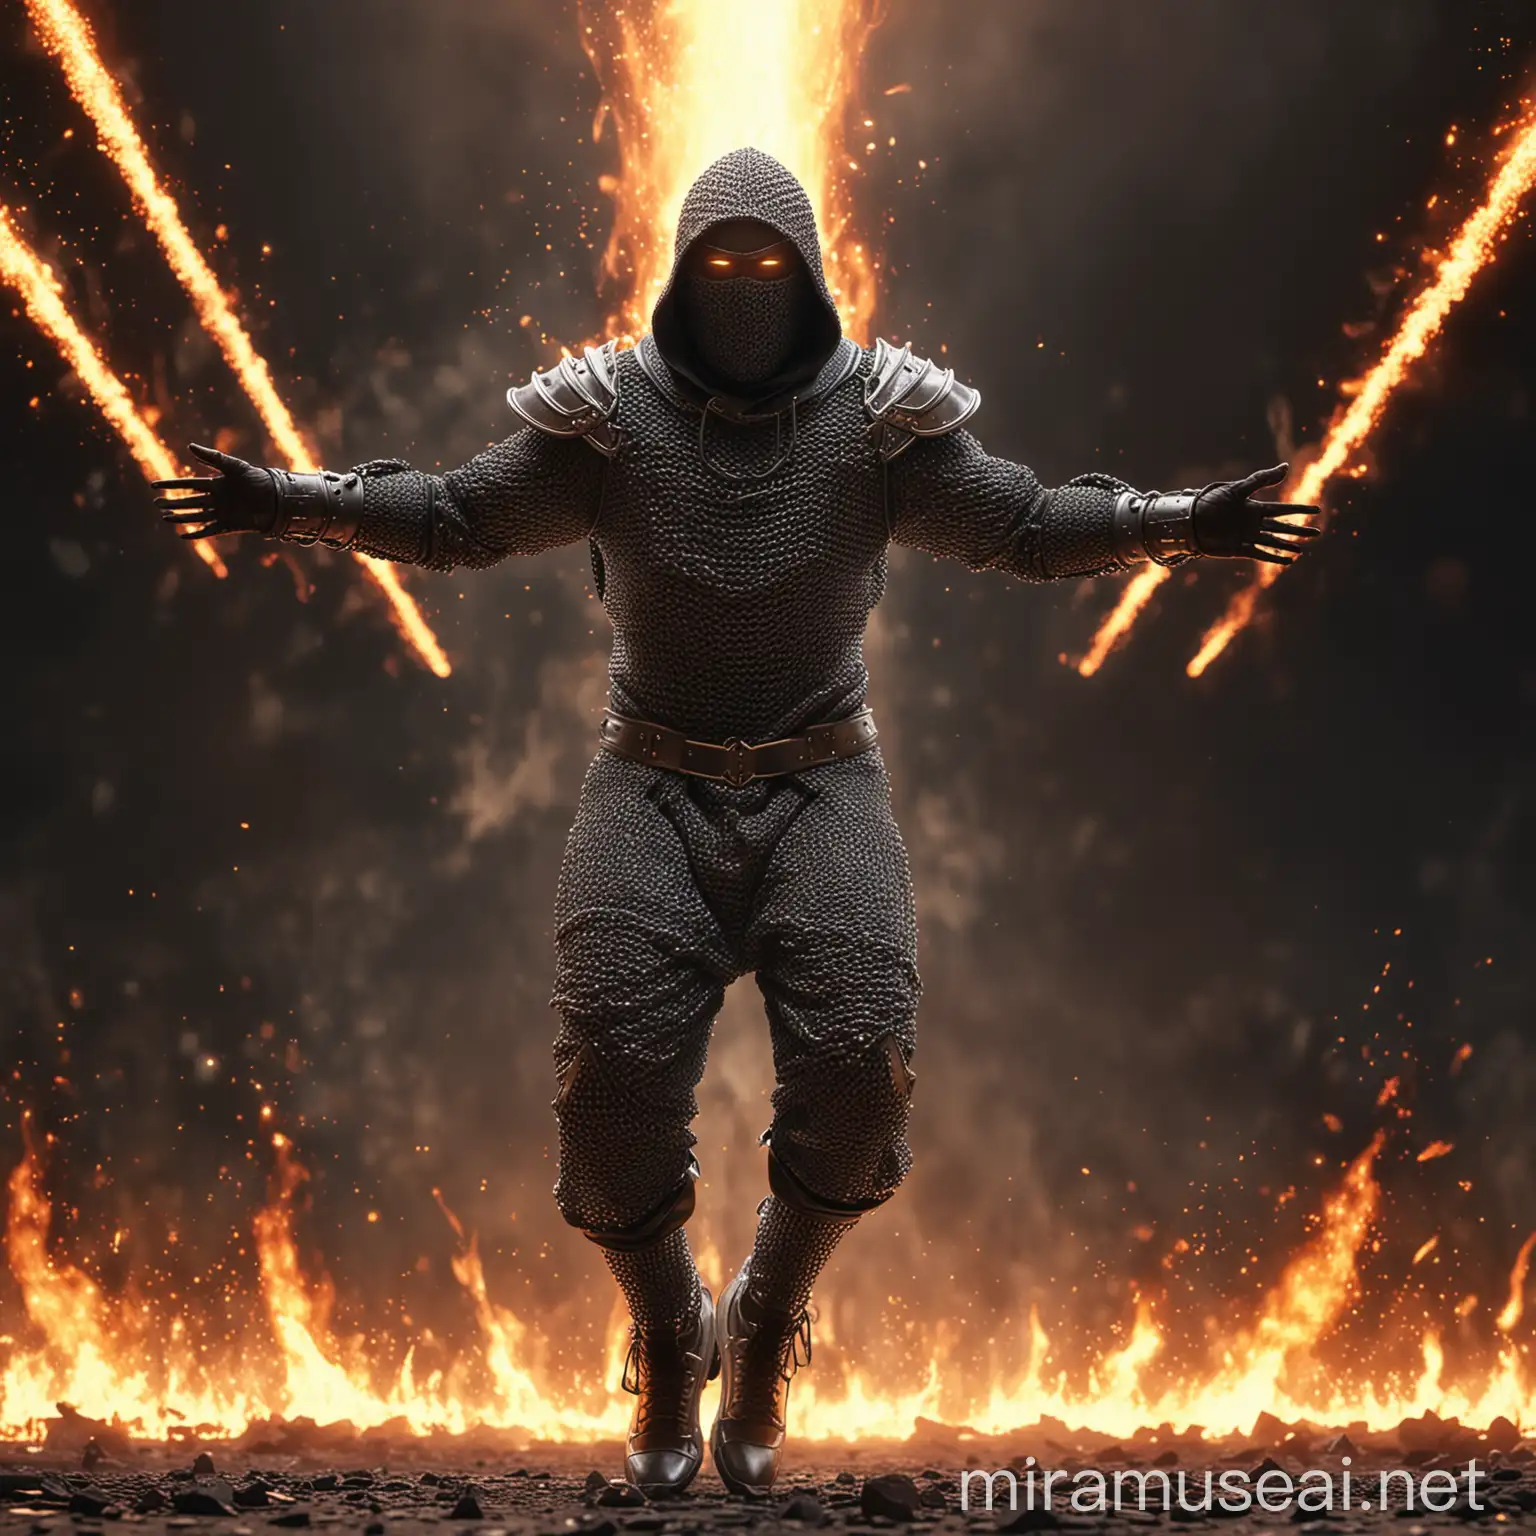 Chainmail Hooded Man in Futuristic Outfit Flying with Arms Open